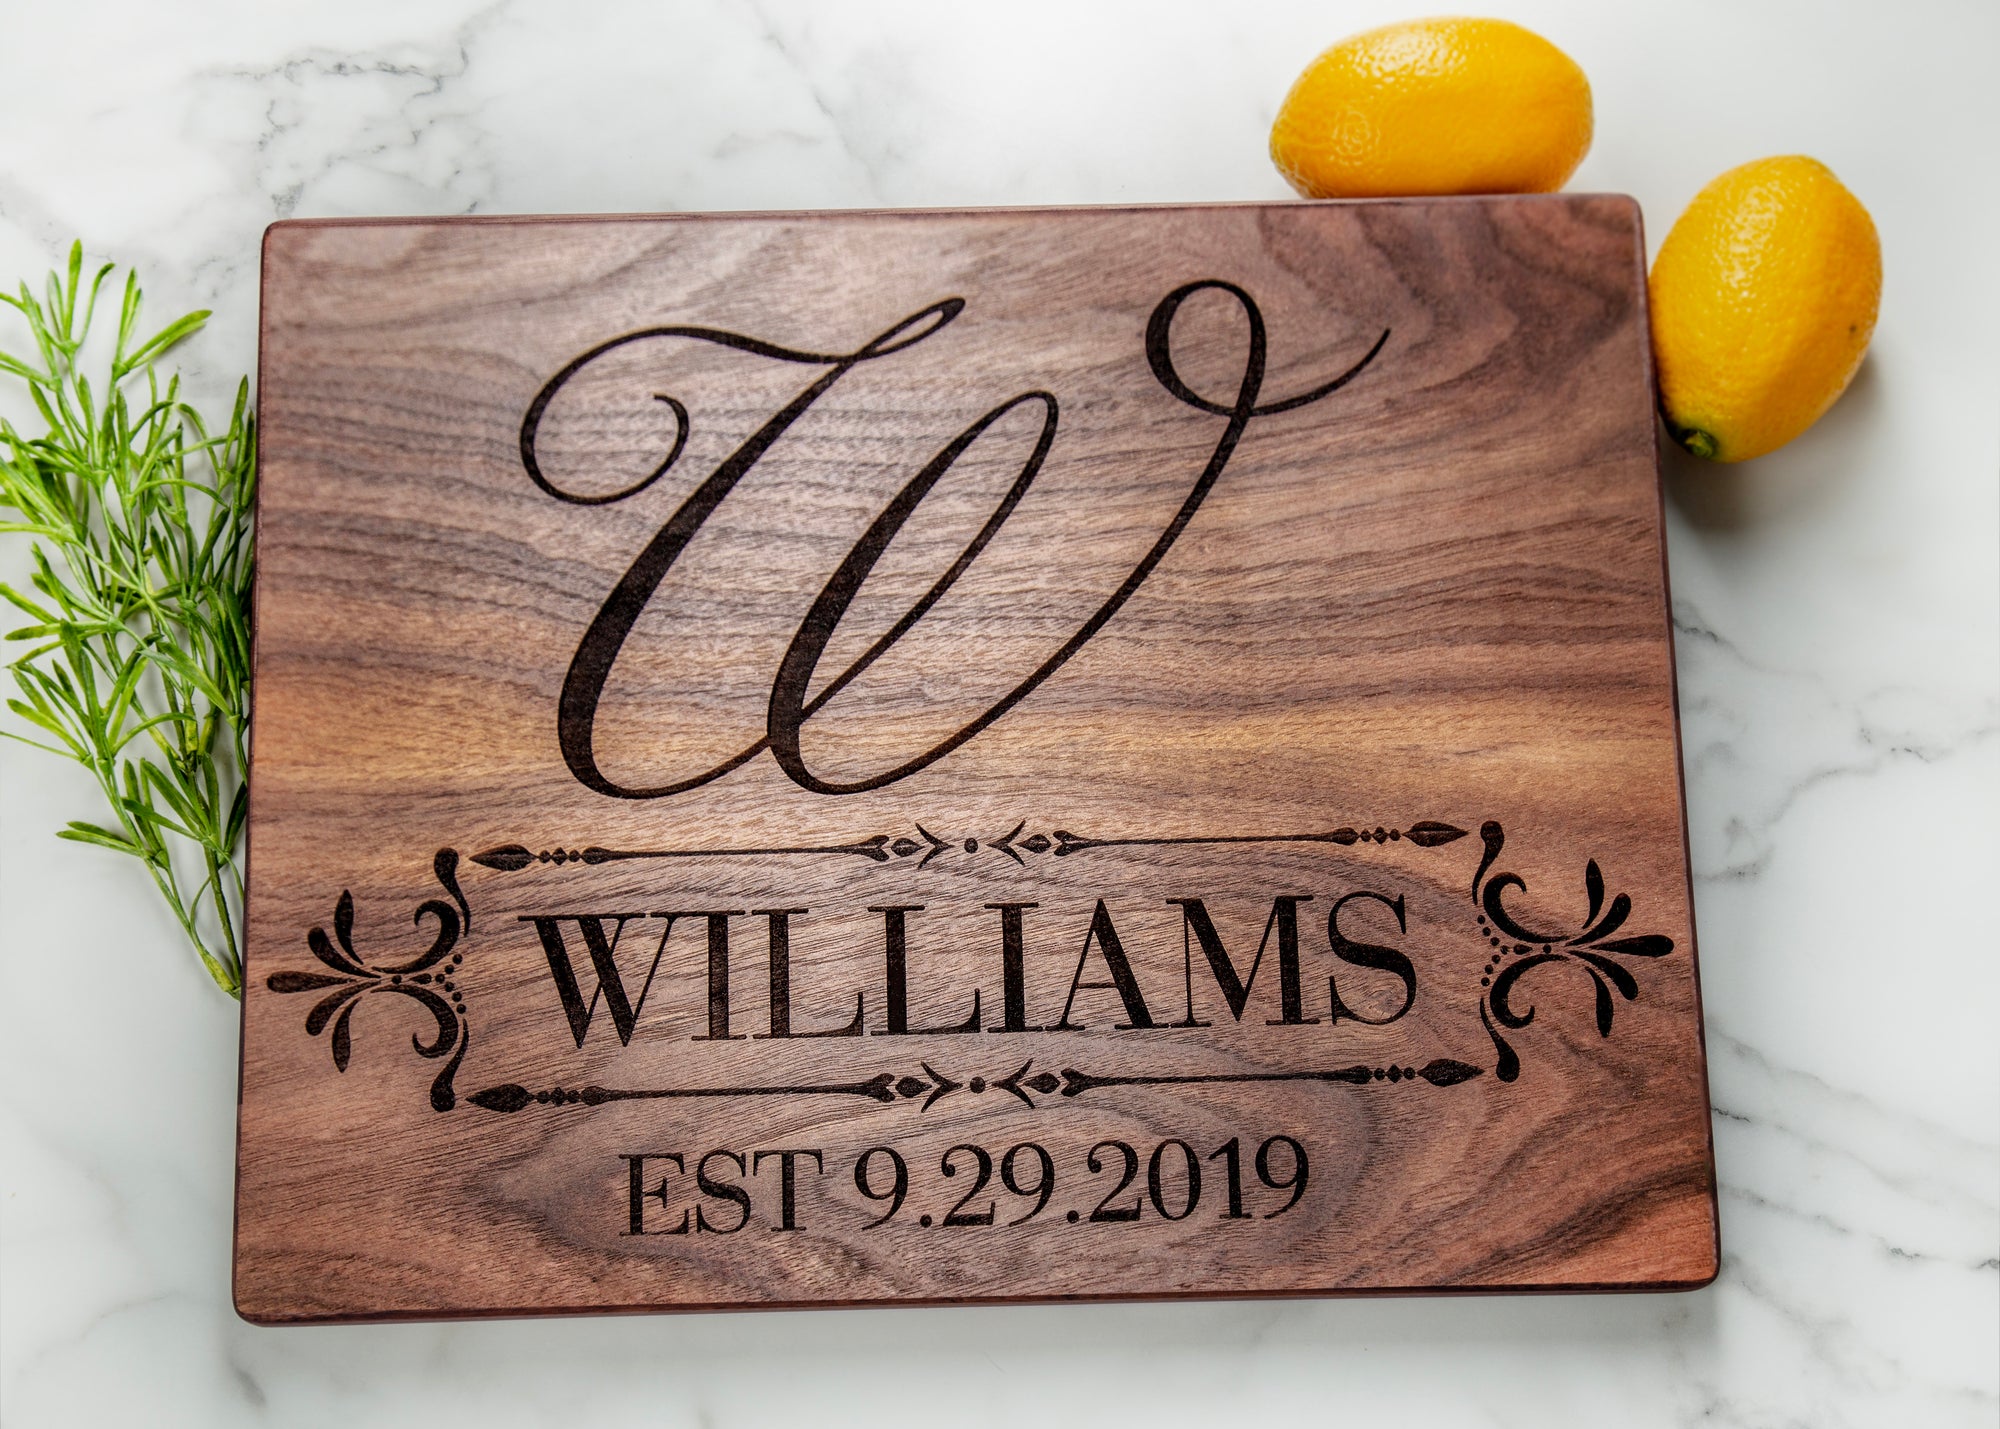 Express your everlasting love with this swoon-worthy personalized cutting board! With an impactful large initial, last name, and date it’s the perfect way to commemorate special occasions--from weddings to anniversaries and beyond. Composed of durable wood, this timeless gift is sure to be treasured for years to come. Make your special someone’s day with this stunning custom cutting board.